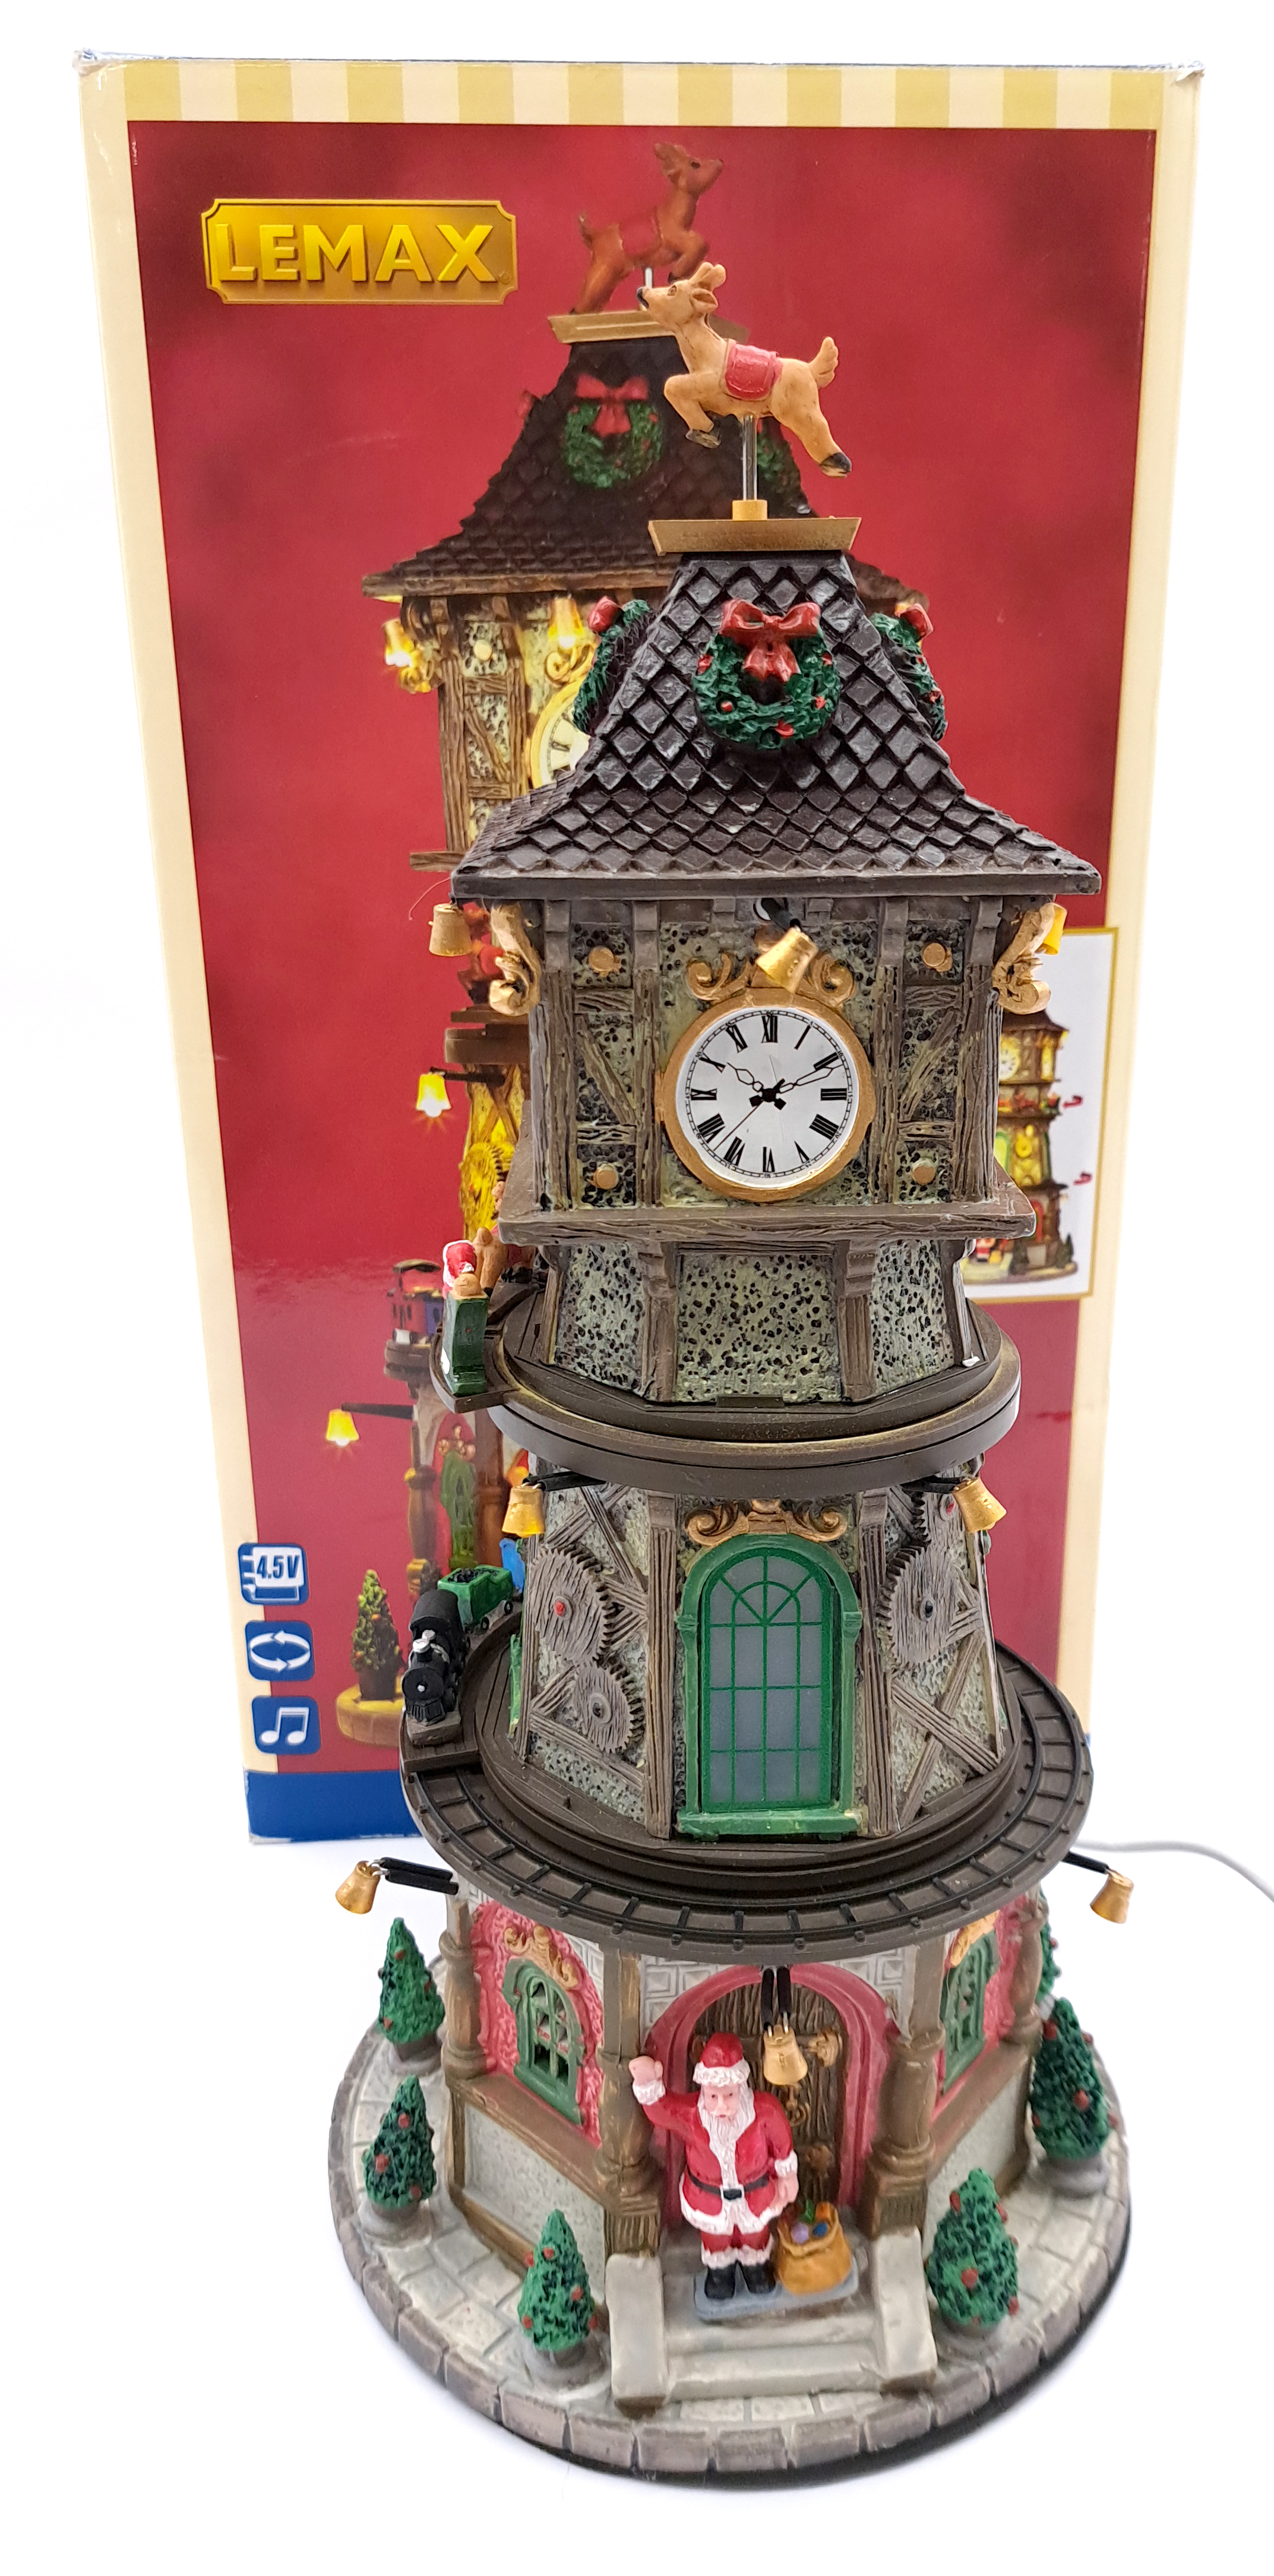 Lemax Christmas Village pair of porcelain lighted buildings / items and a Konst Smide Snow Globe ... - Image 3 of 3